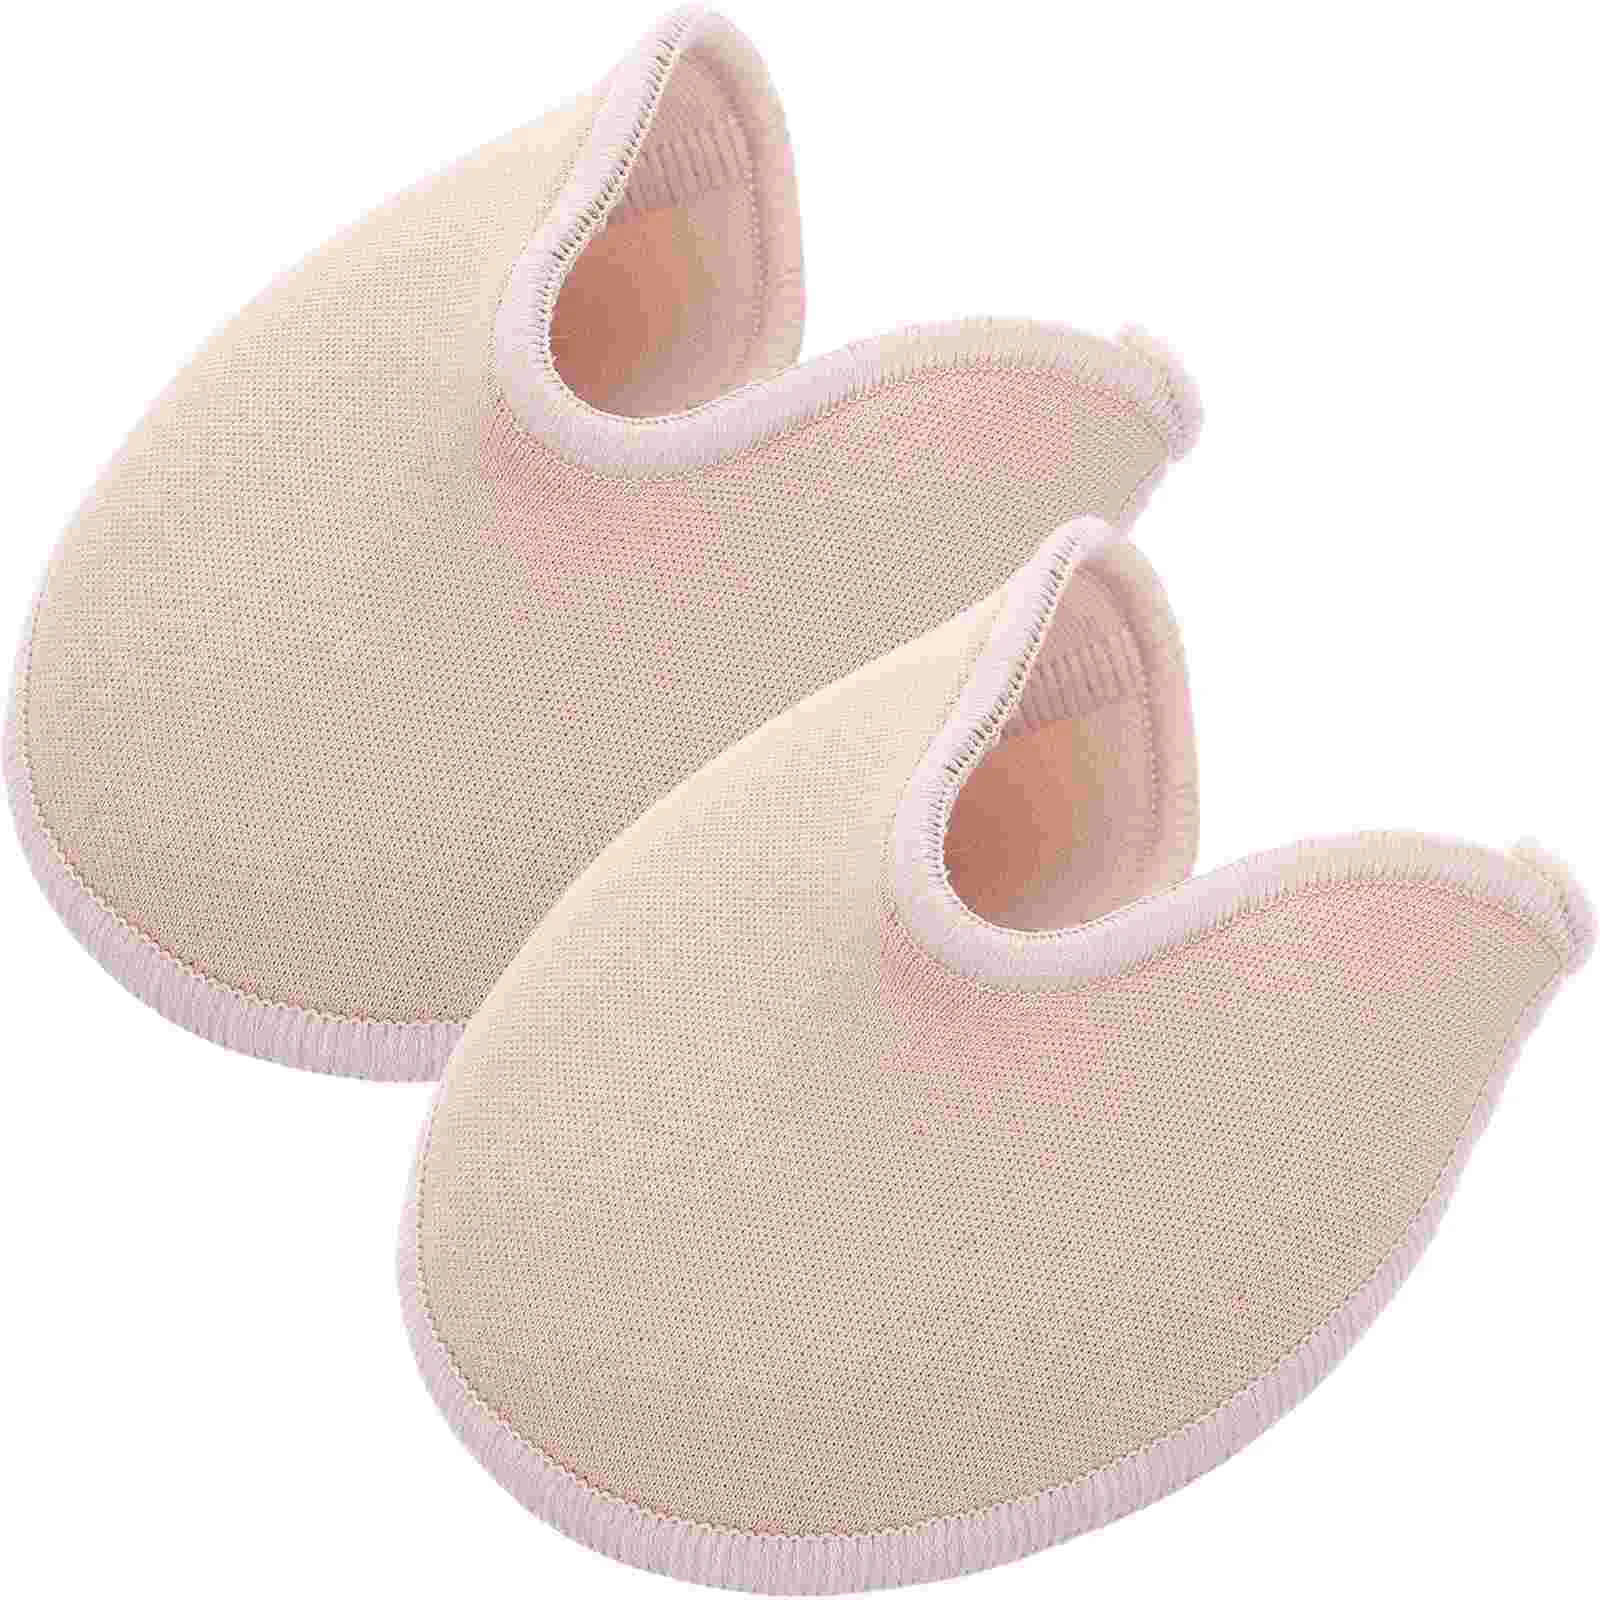 Ballet Pointe Set Shoes Toe Cushions Insole Cushioning Pads for Knitted Fabric Protector Caps Miss